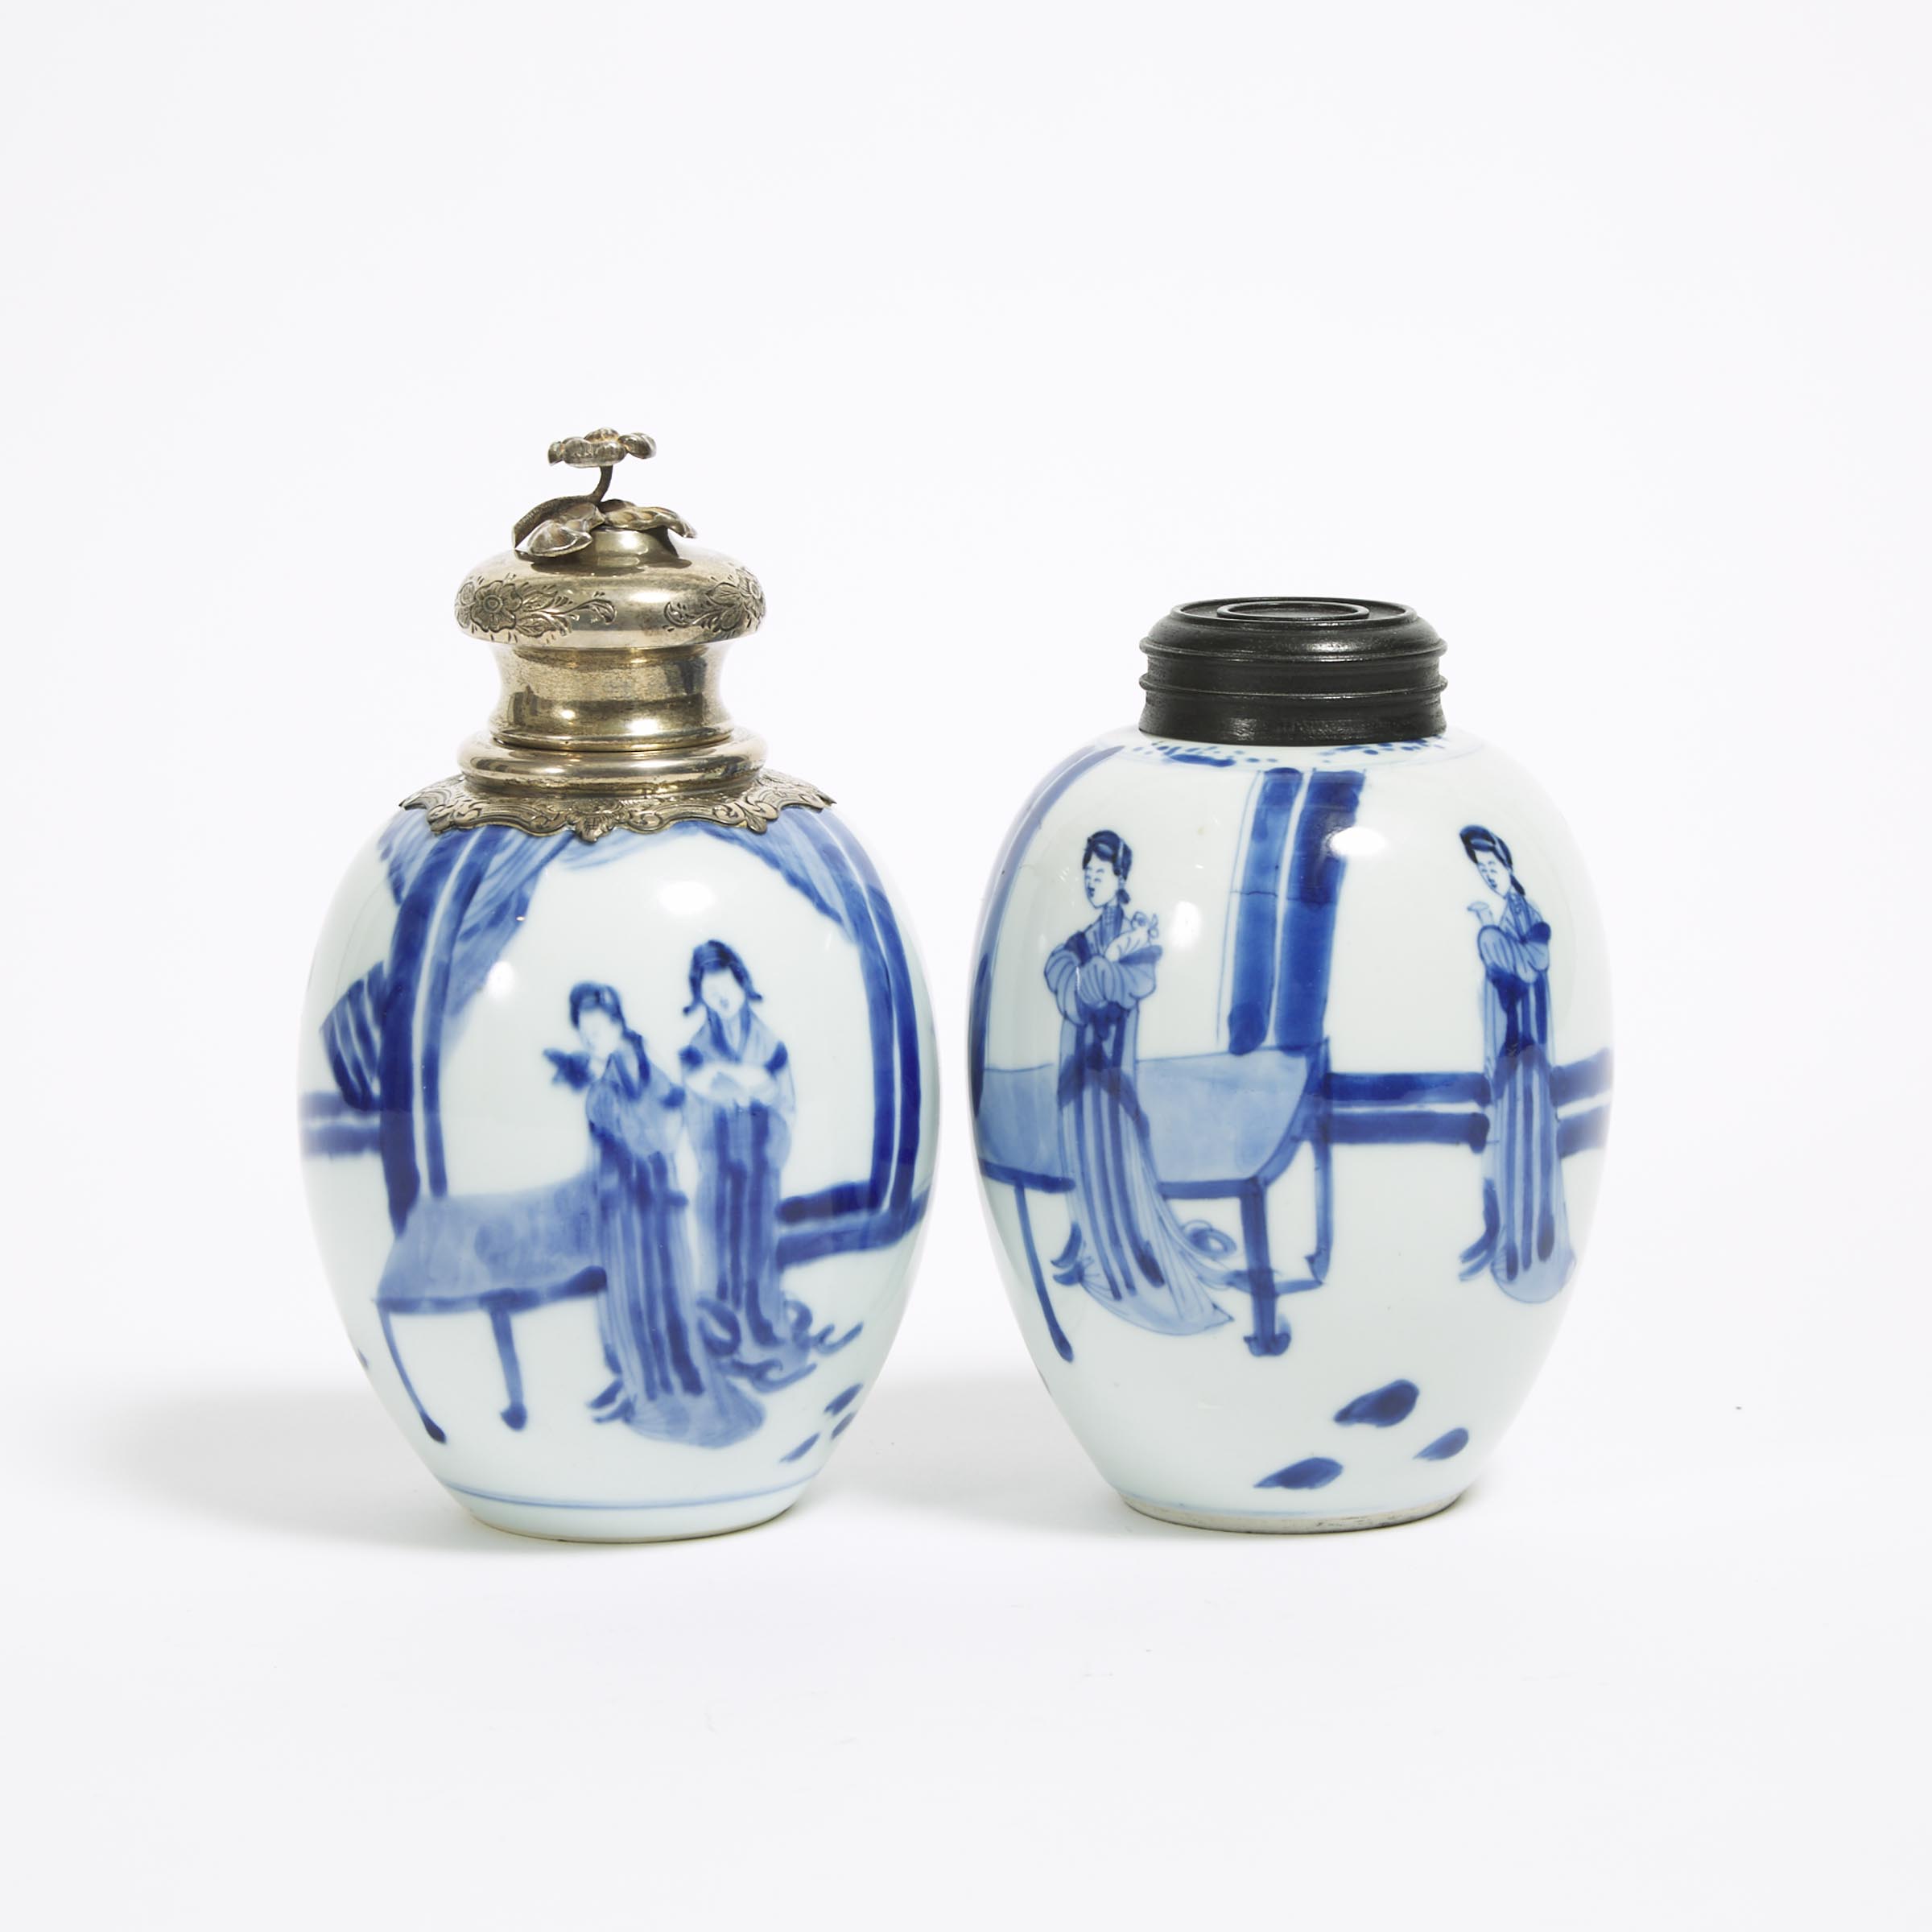 A Dutch Silver Mounted Blue and White Tea Caddy, Kangxi Period (1662-1722), Together With a Blue and White Tea Caddy